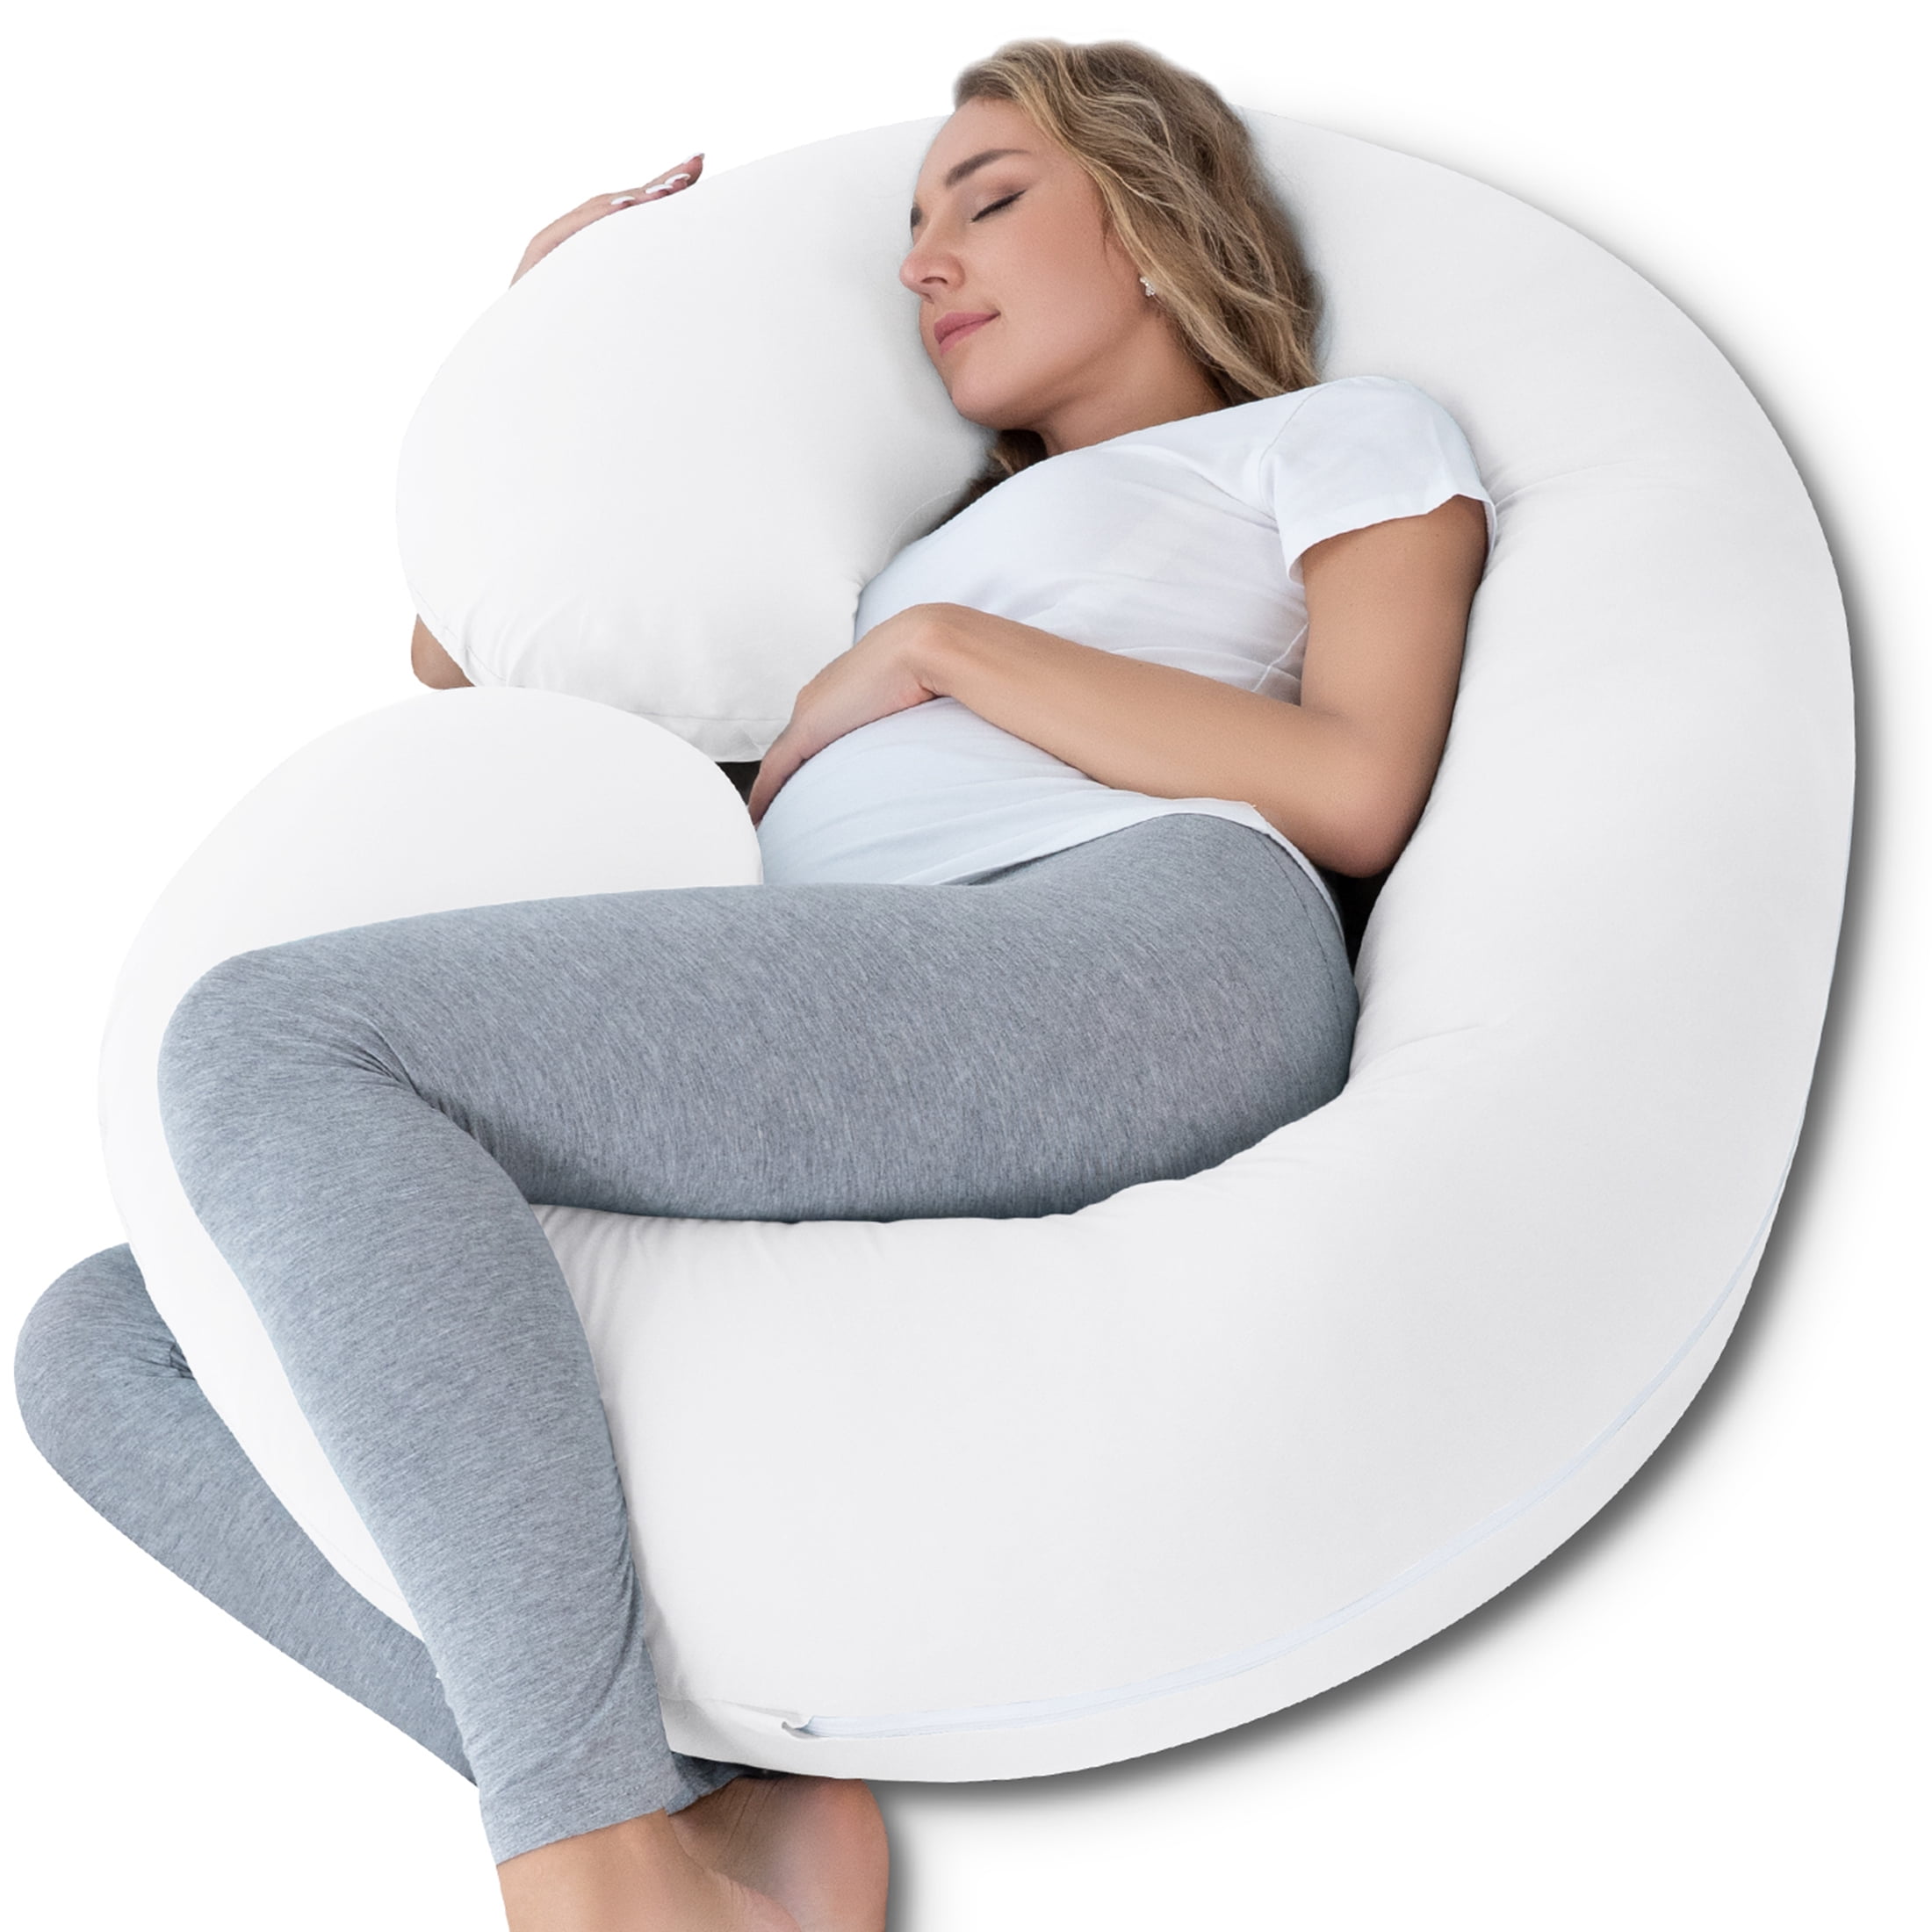 BelliPod Pregnancy Pillow Maternity Pillow Cotton with Cover Body Pill